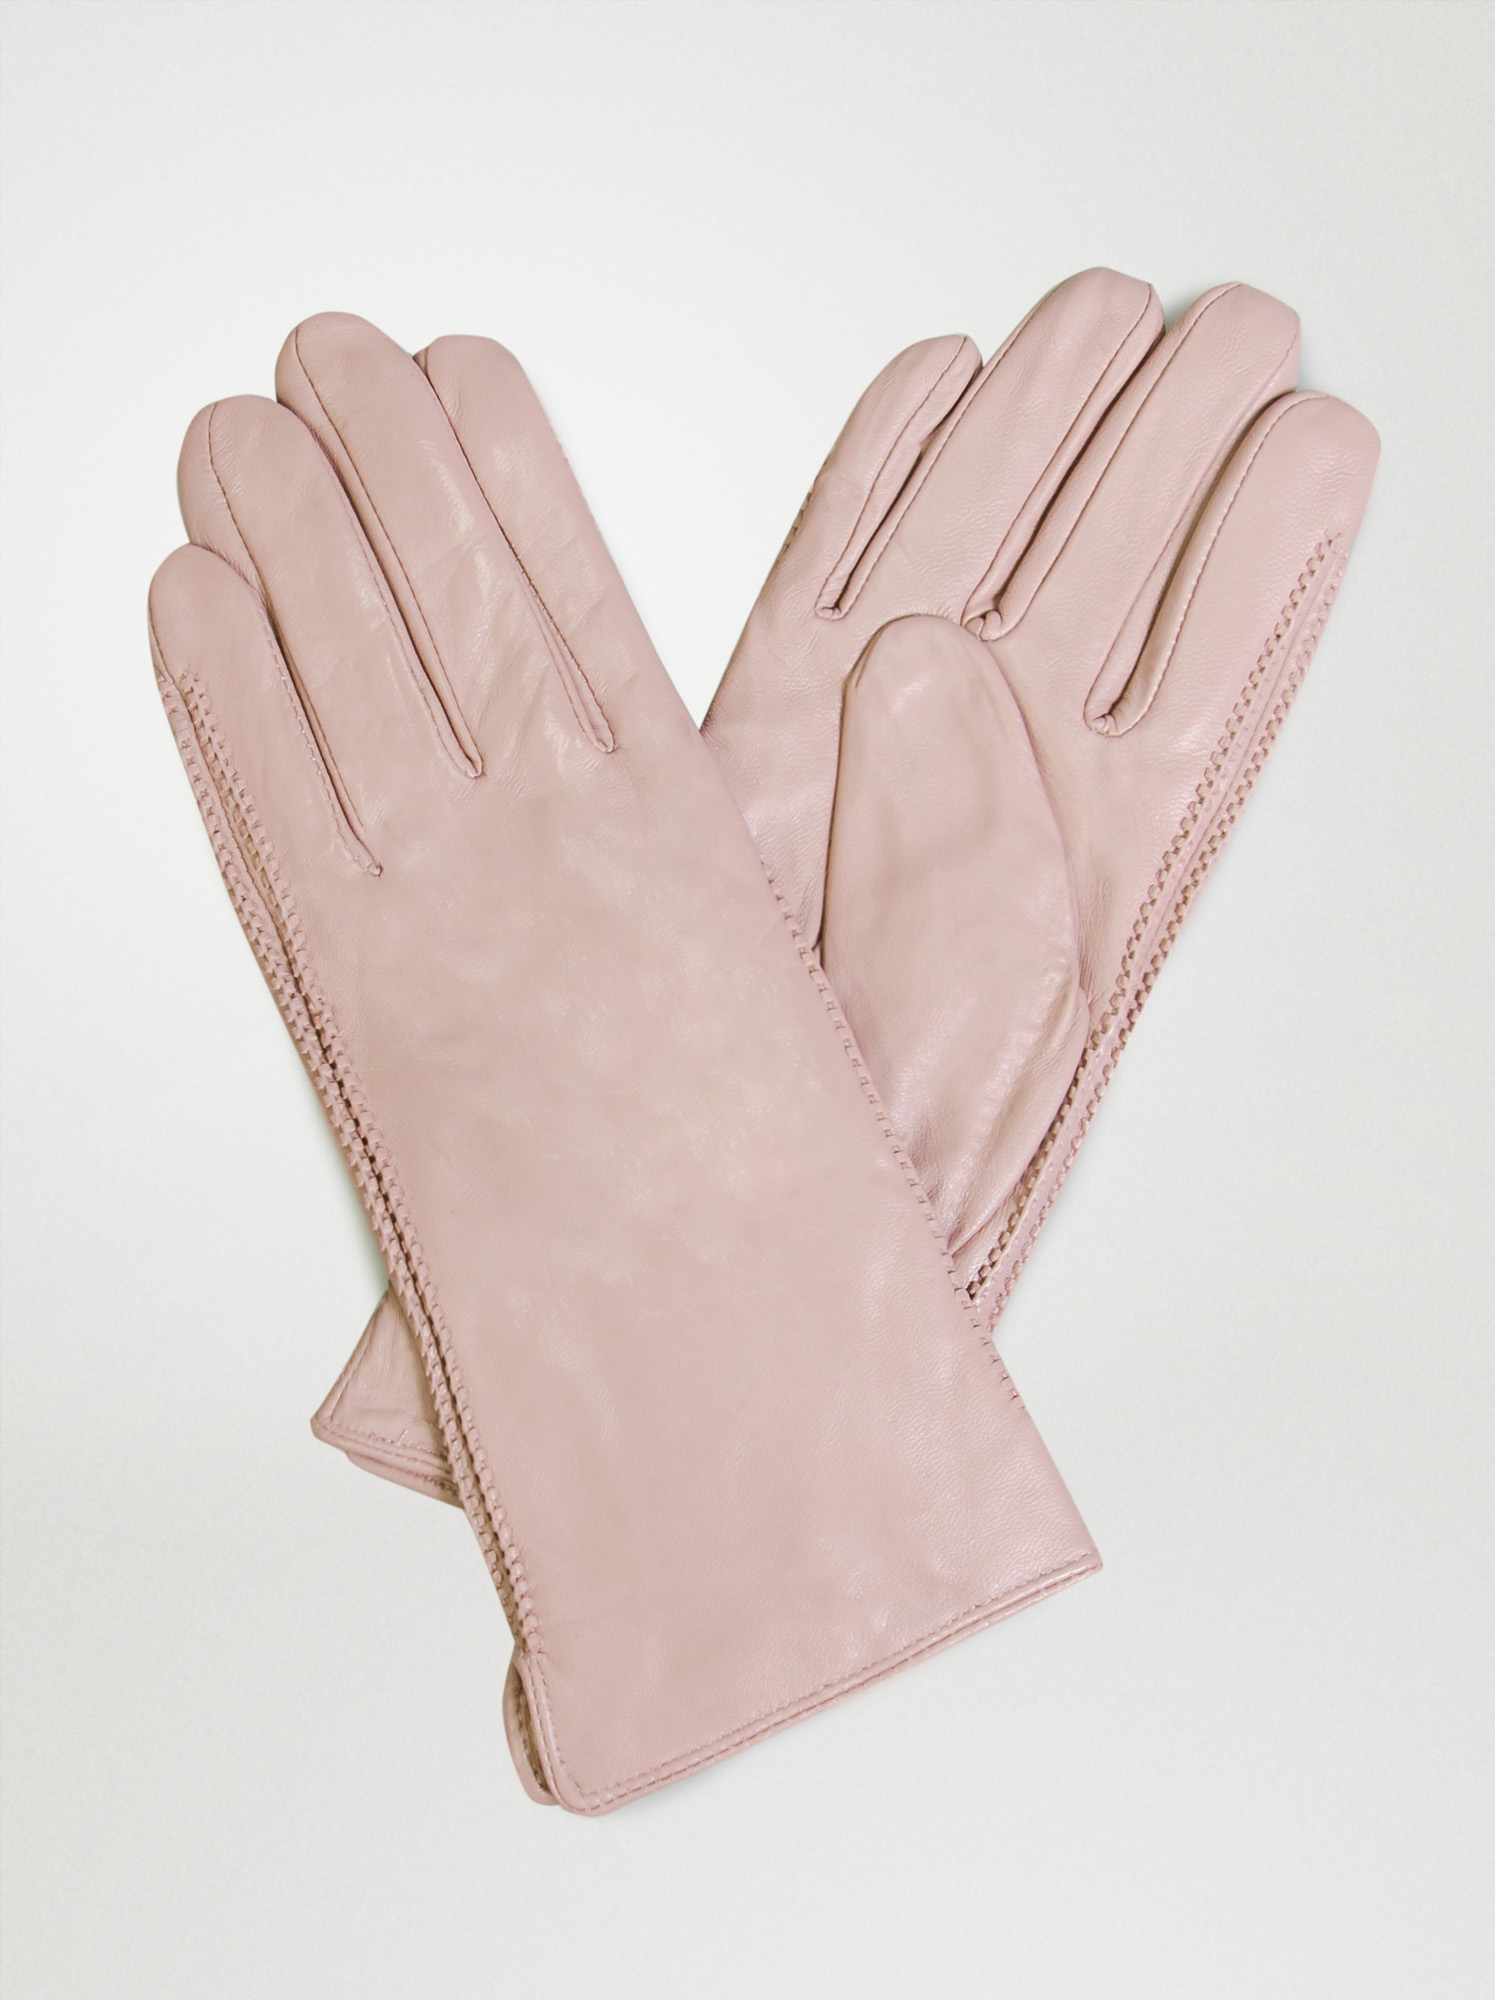 Pink leather gloves - Allora image 1